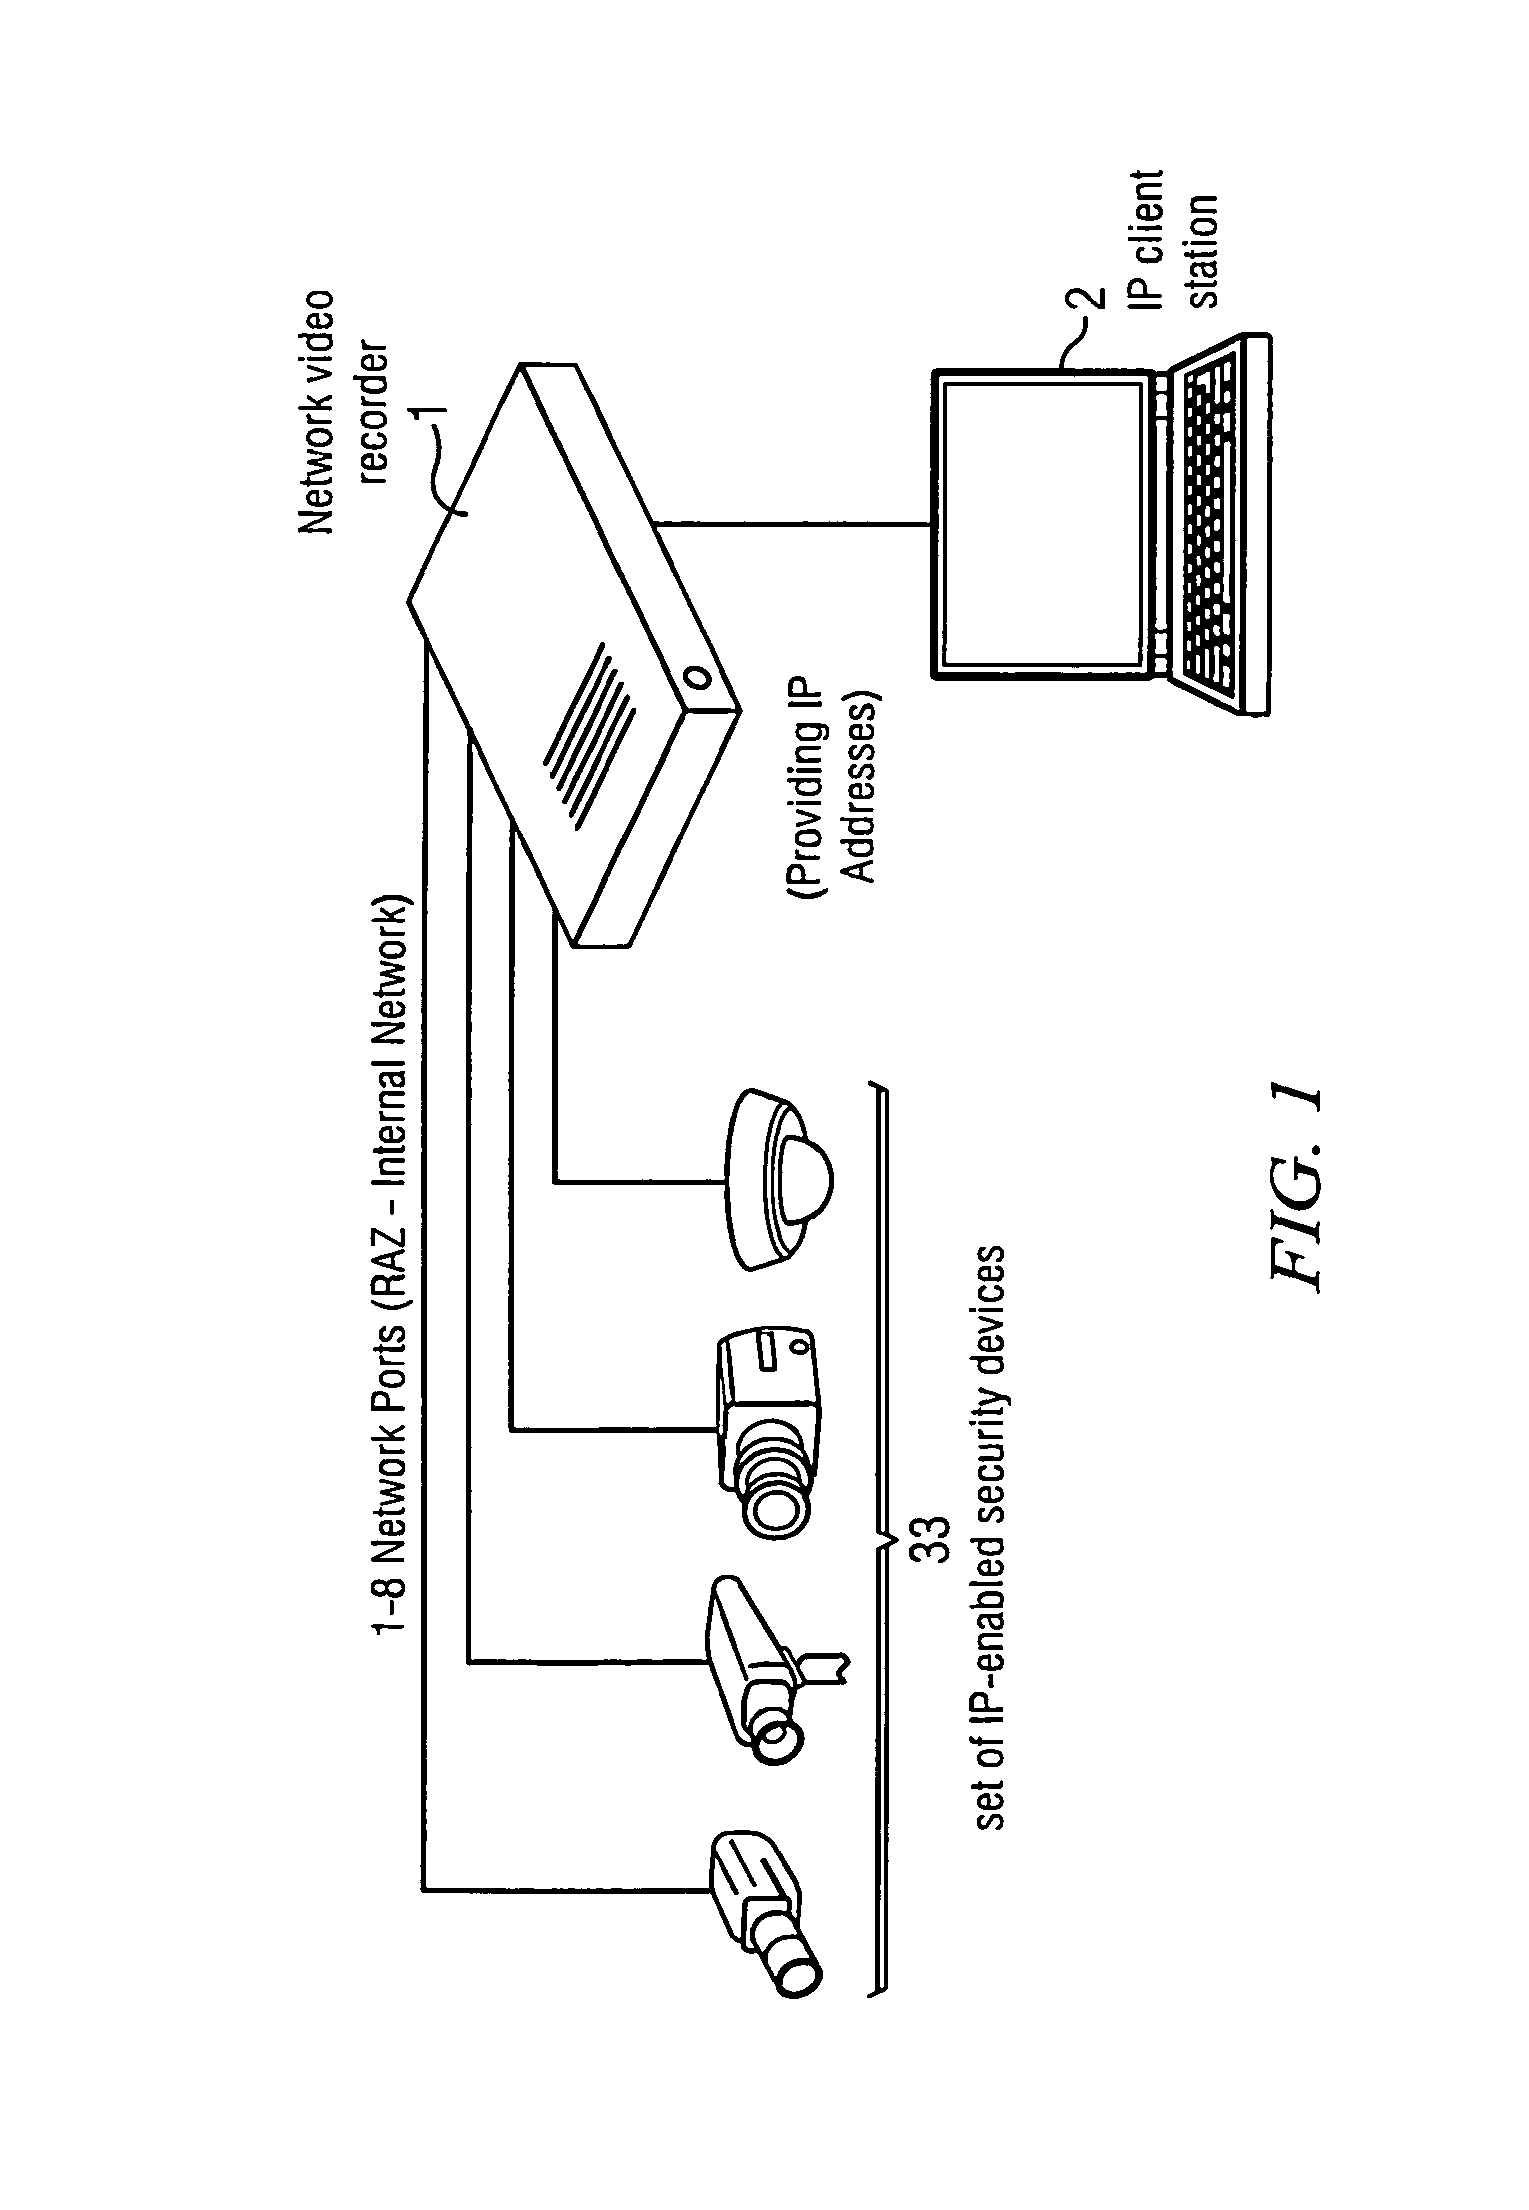 Network video recorder system